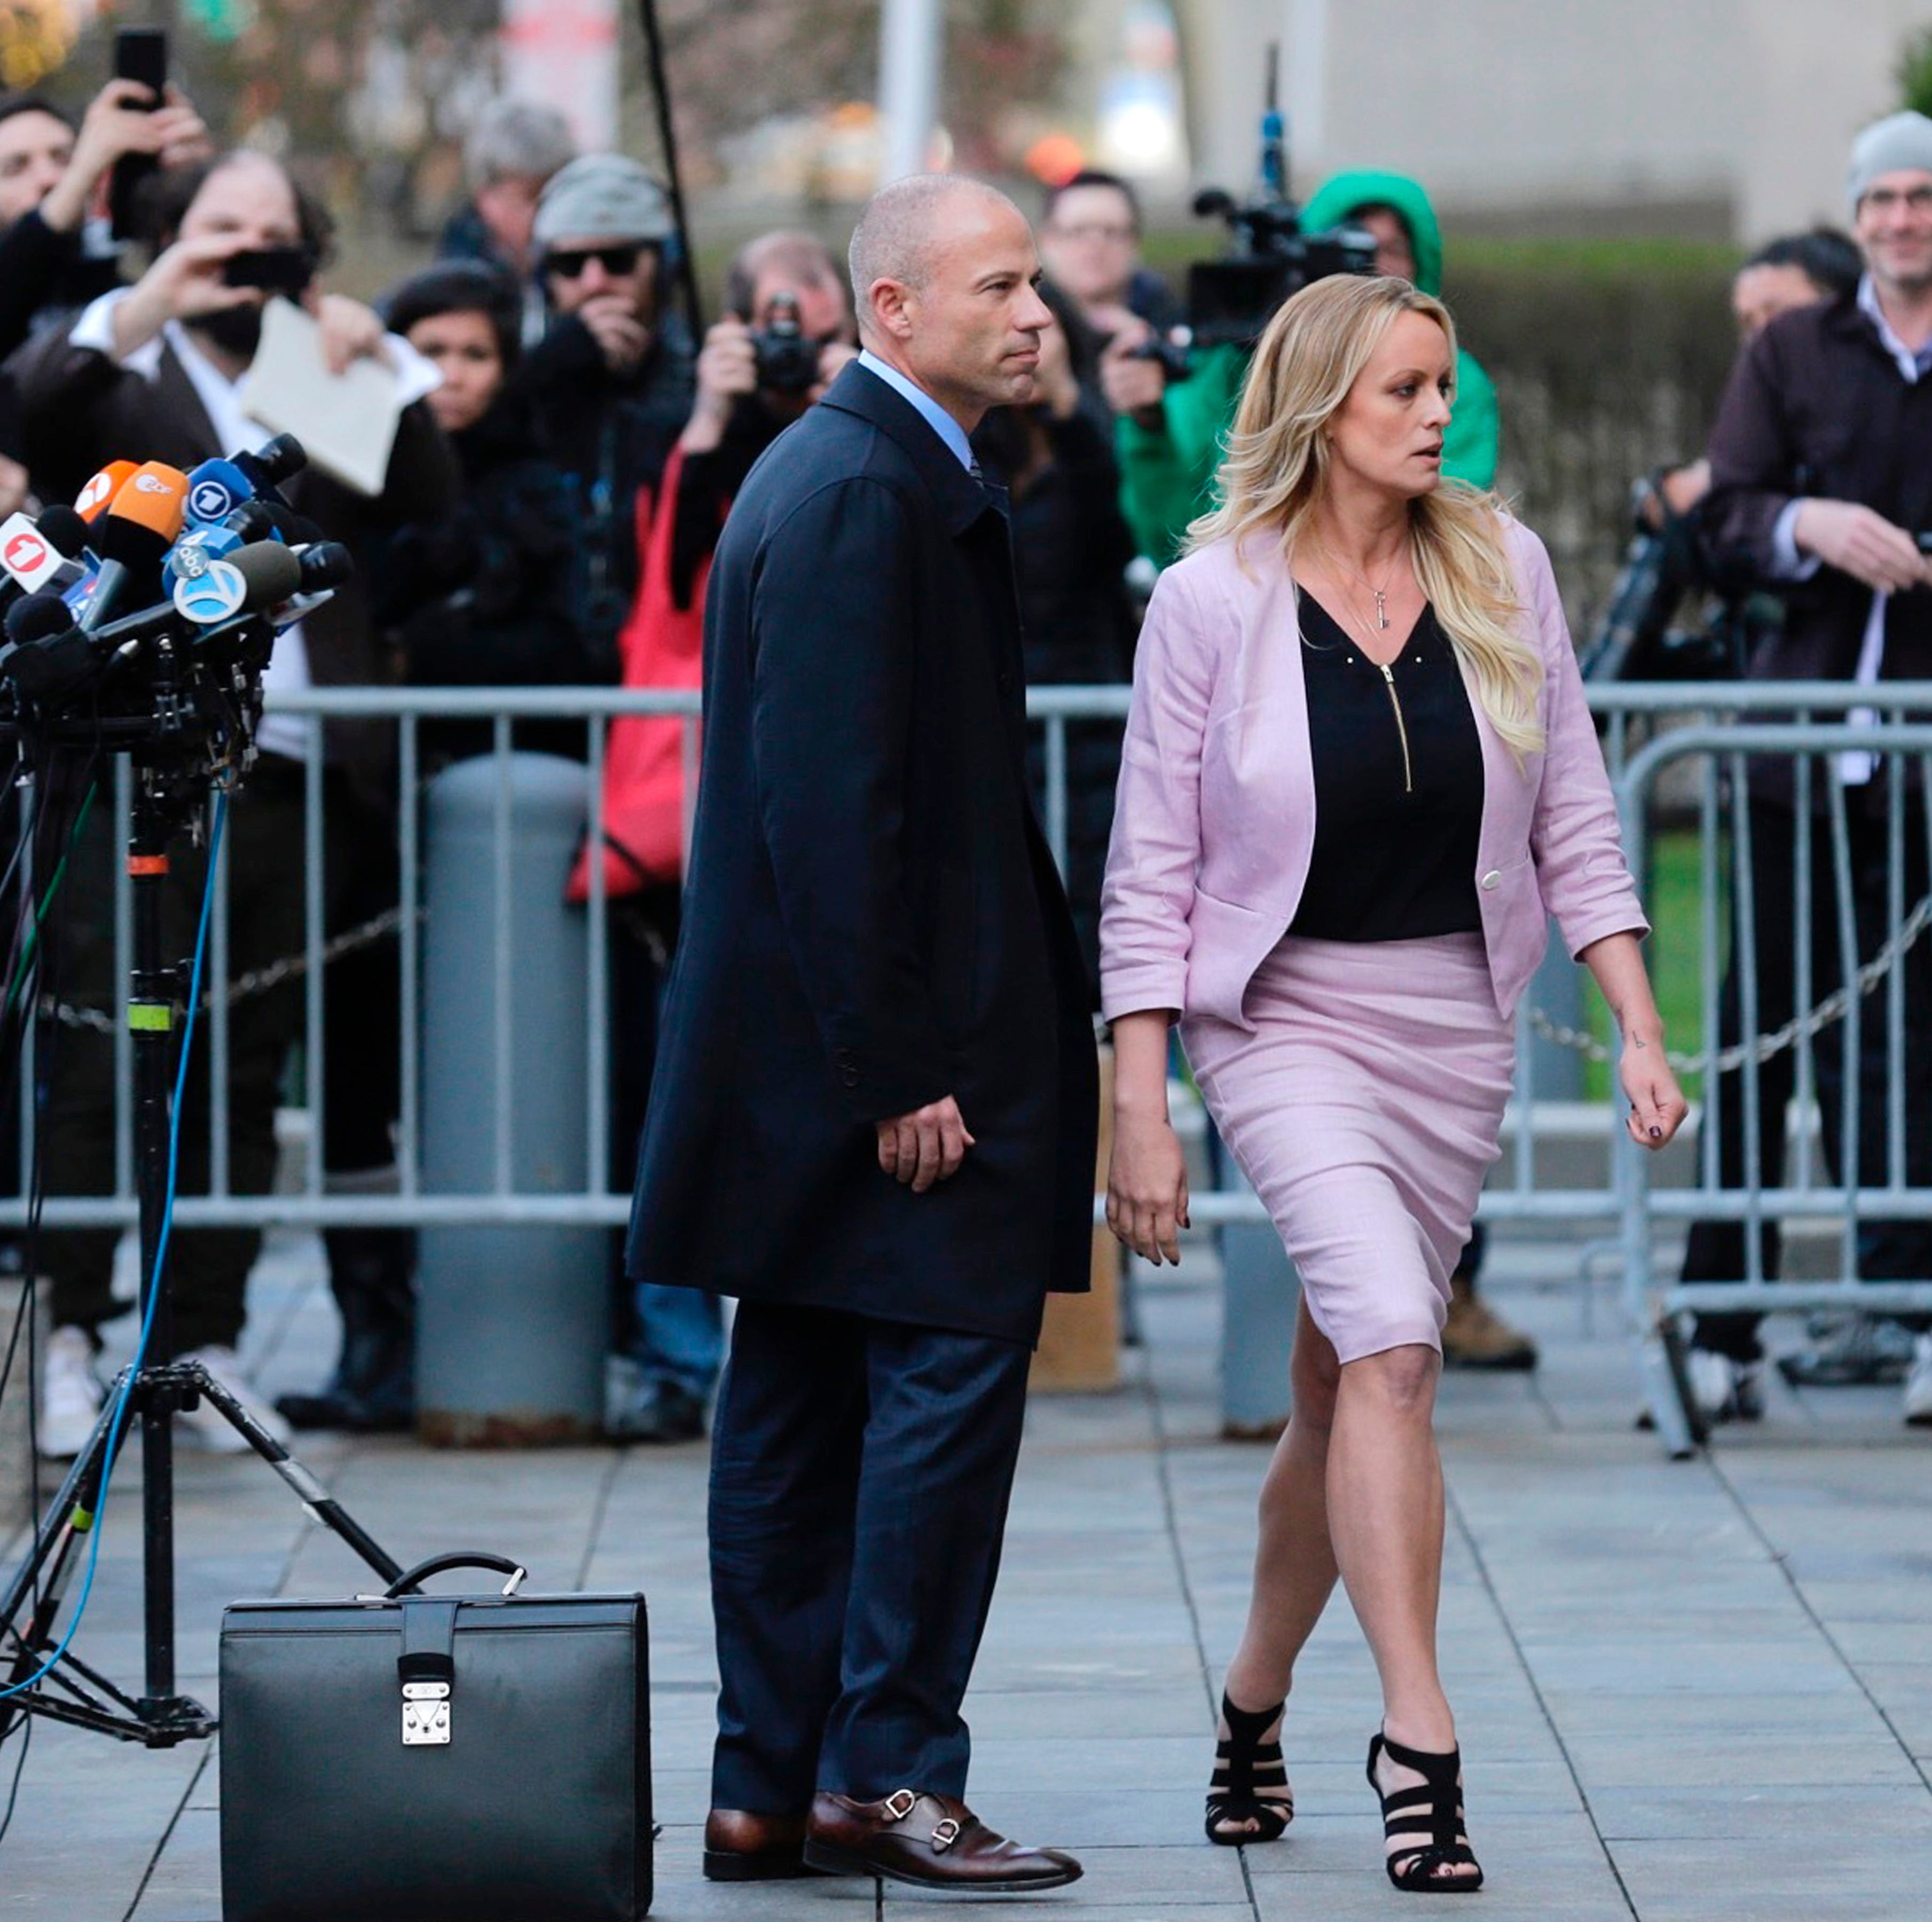 Porn actress Stormy Daniels, accompanied by her attorney, Michael Avenatti, left, leaves federal court, Monday, April 16, 2018 in New York. A U.S. judge listened to more arguments about President Donald Trump's extraordinary request that he be allowe